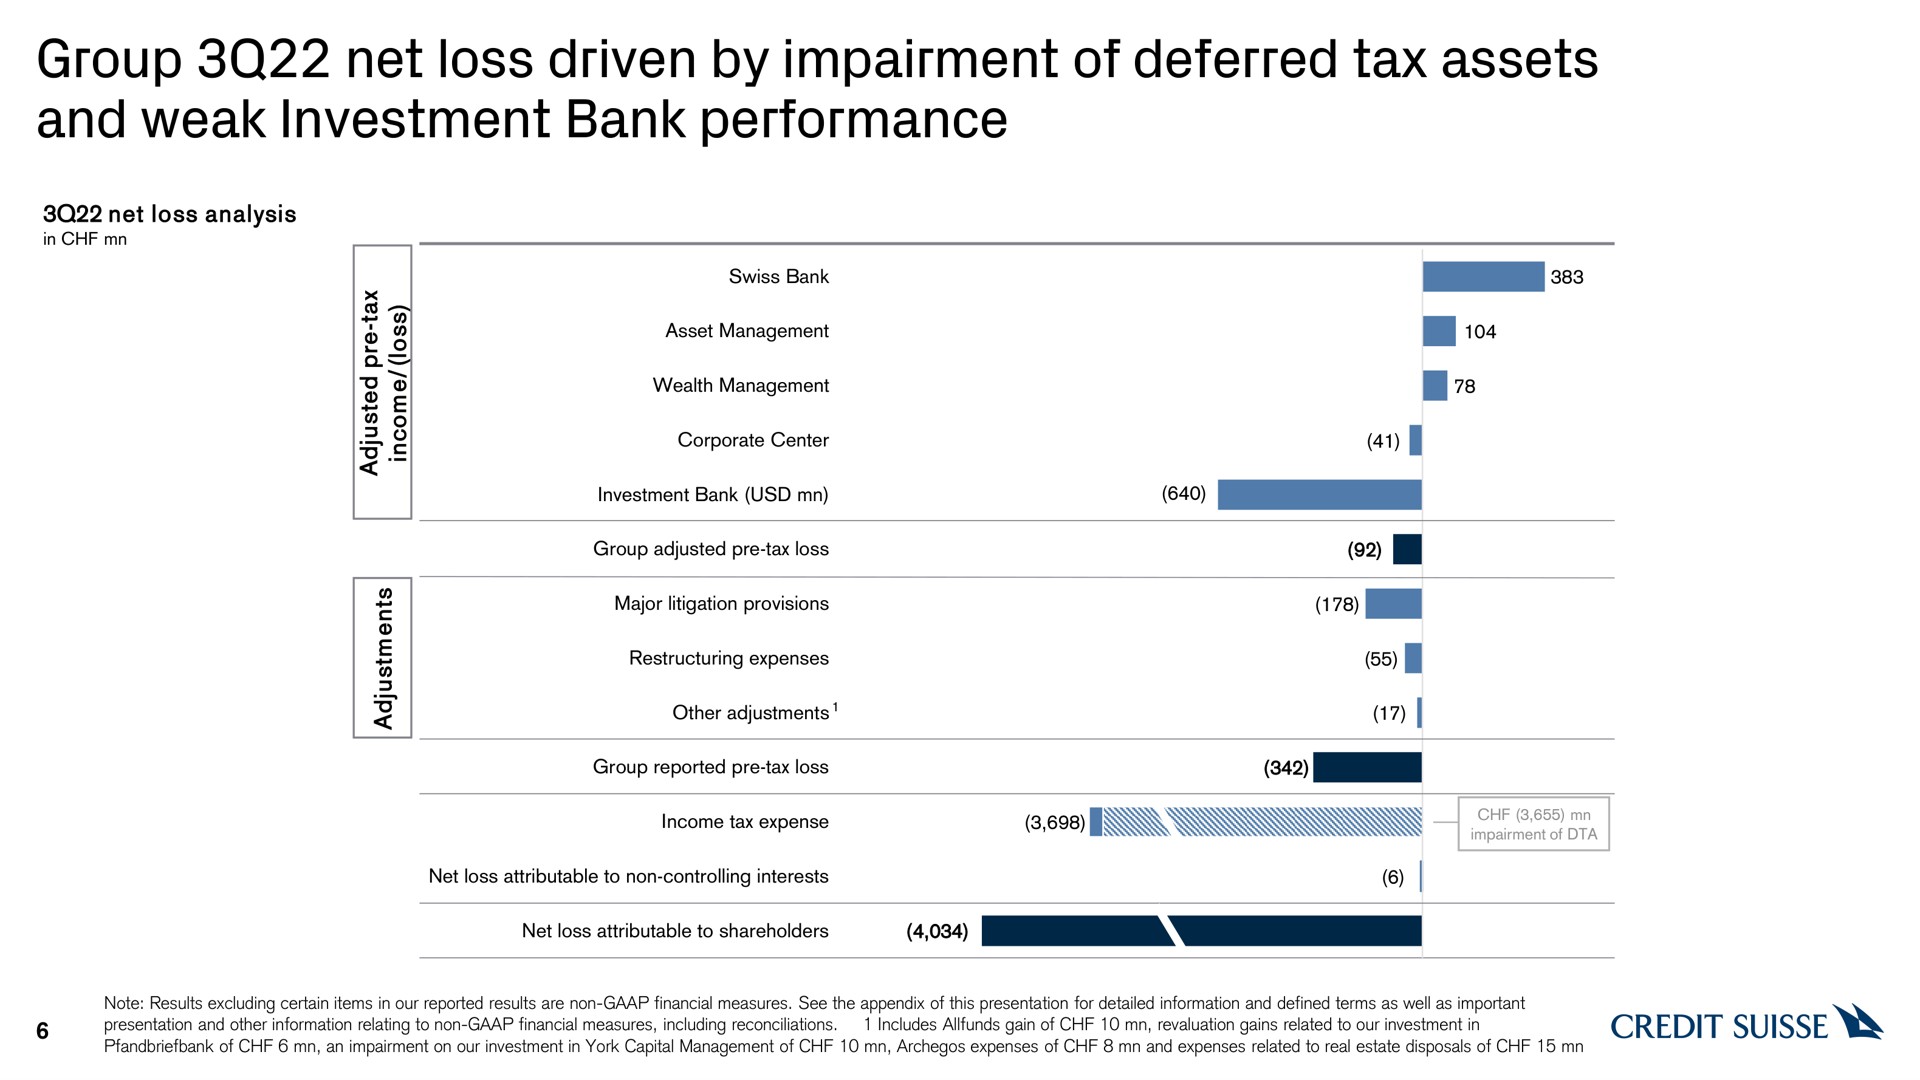 group net loss driven by impairment of deferred tax assets and weak investment bank performance | Credit Suisse